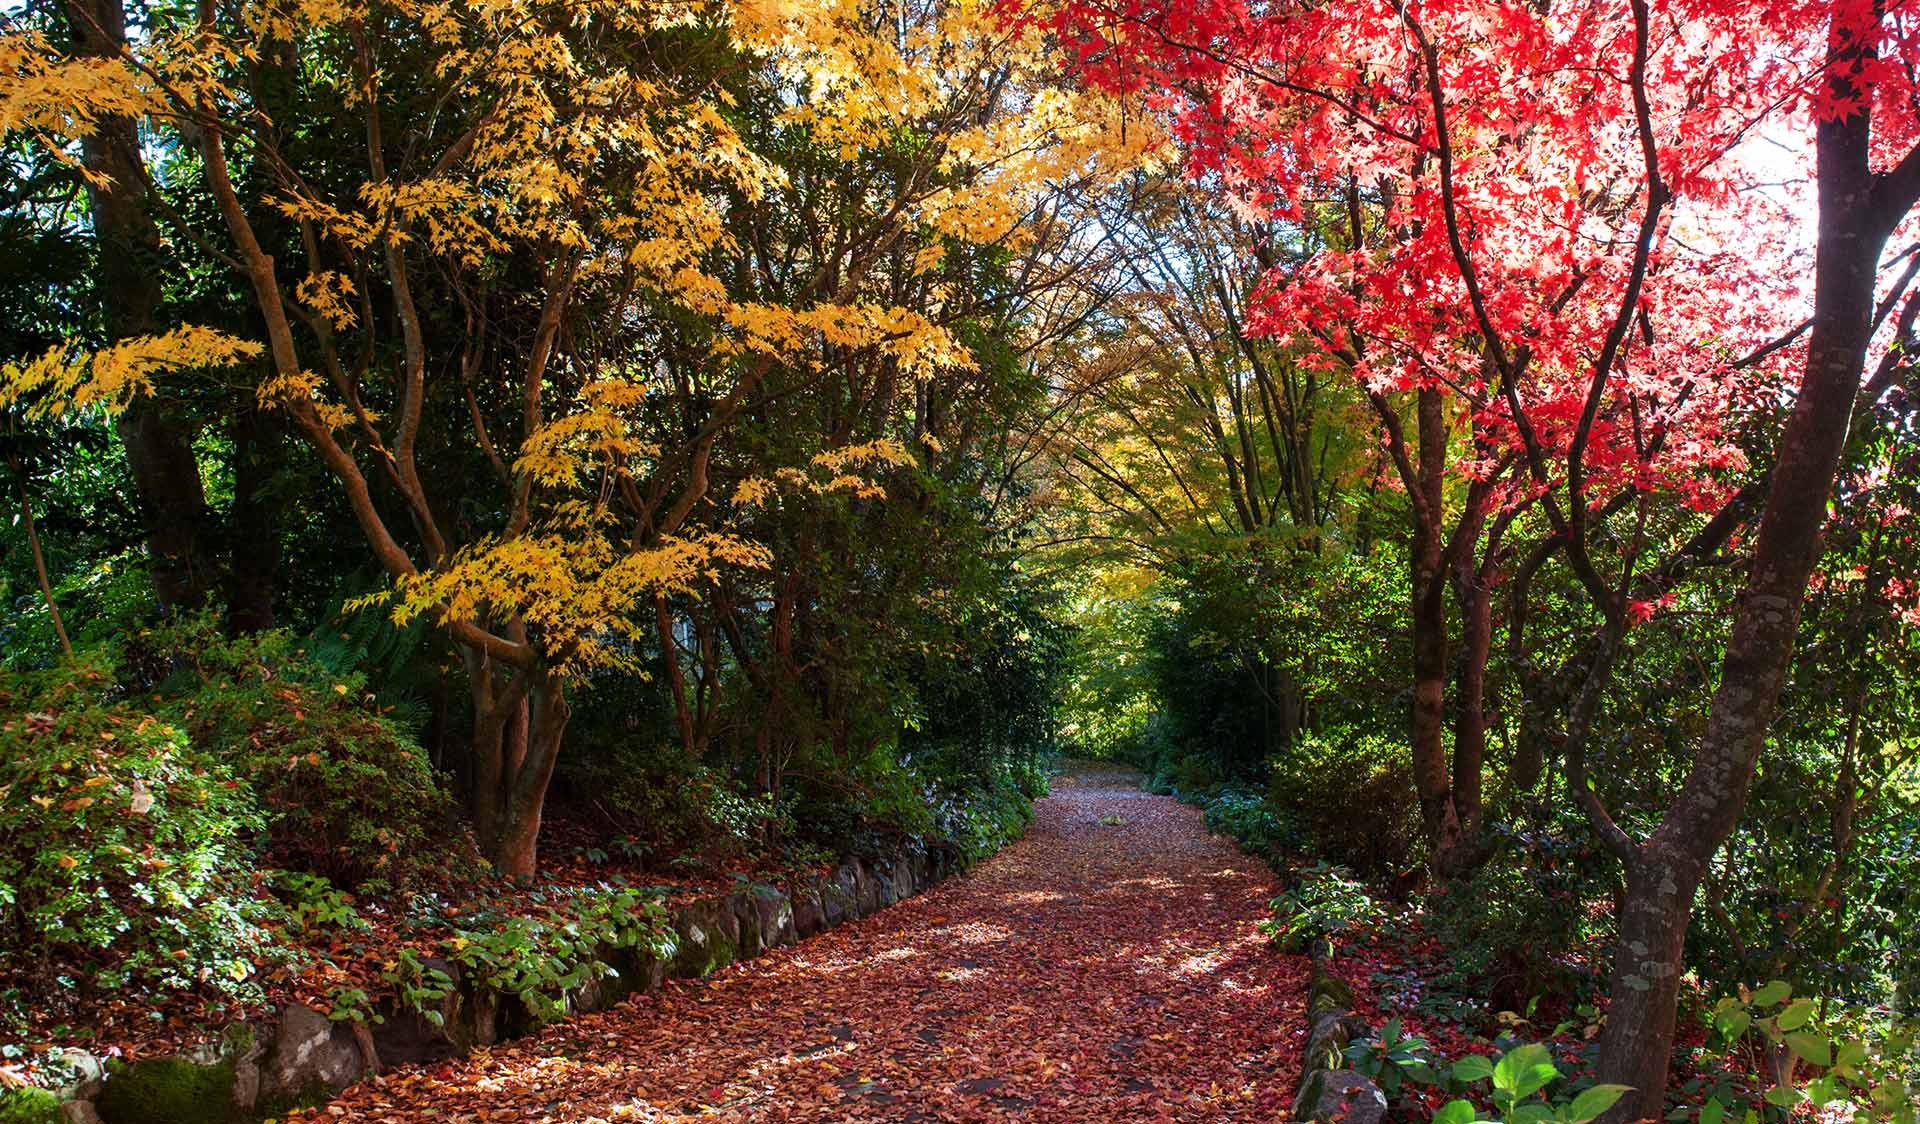 Autumn leaves in the George Tindale Memorial Garden in the Dandenong Ranges National Park.